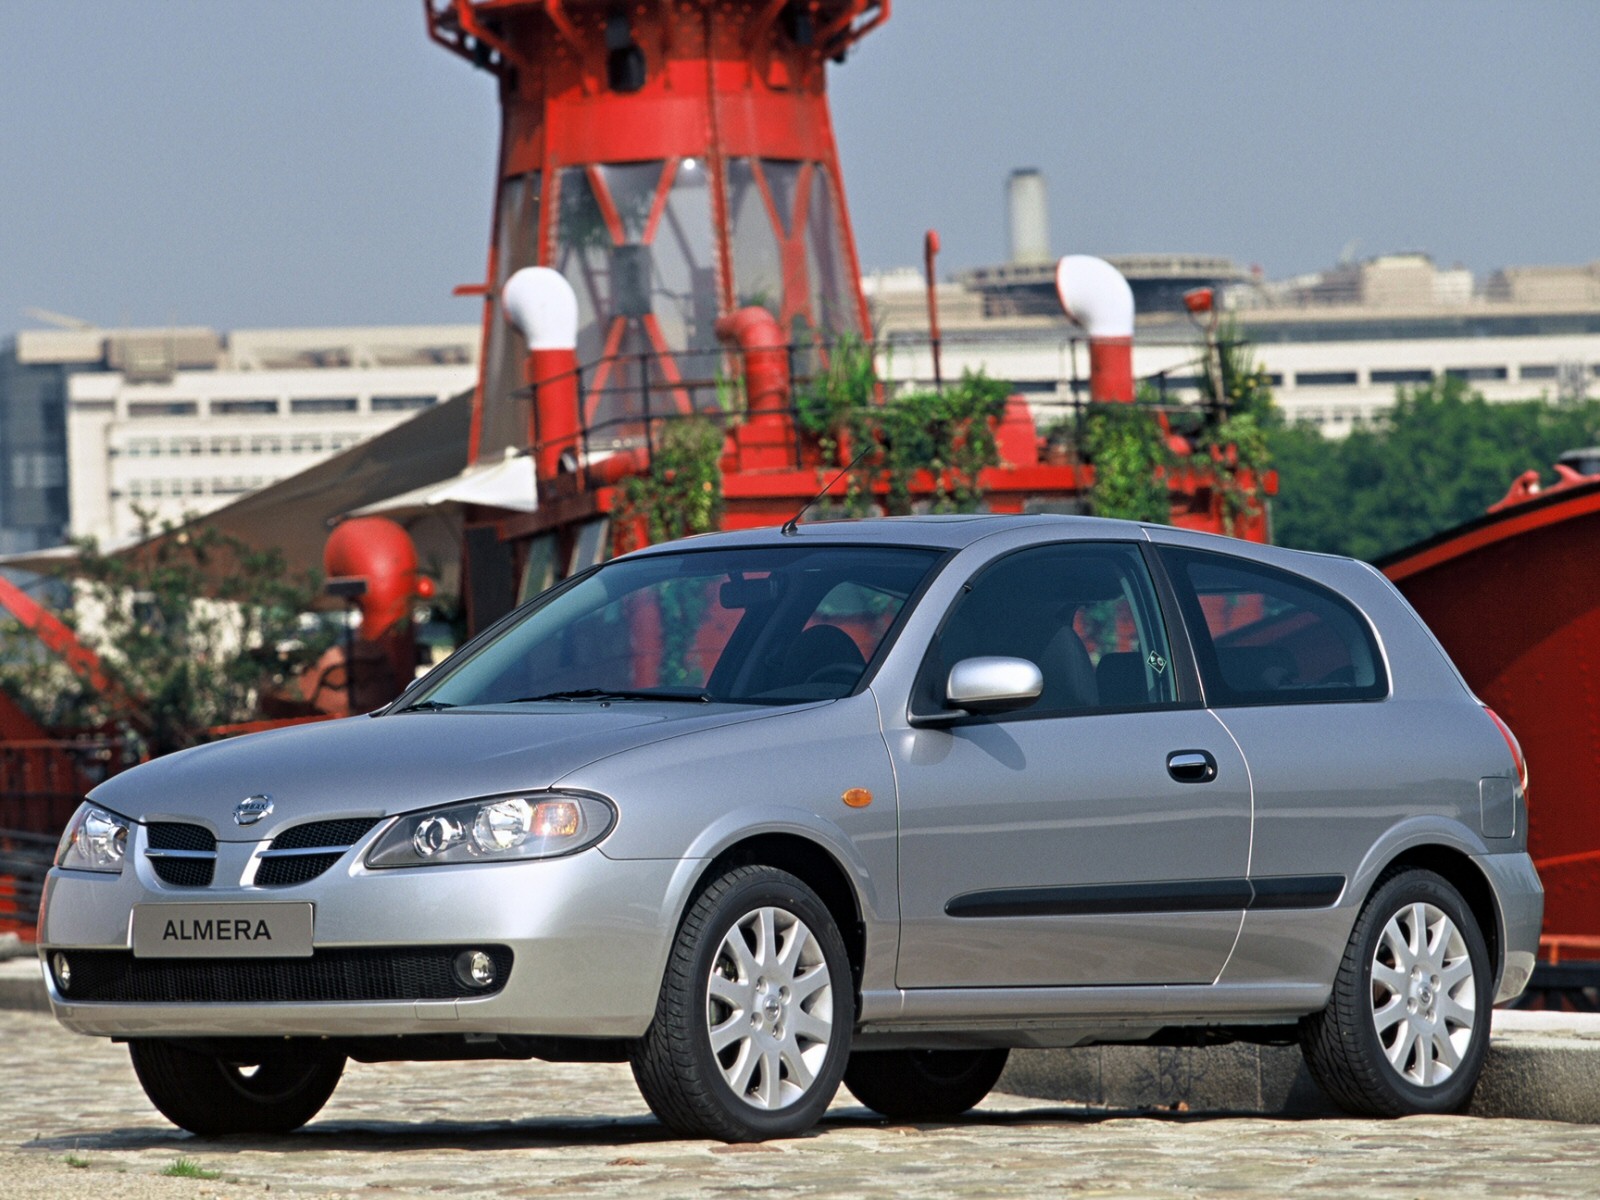 Car in pictures car photo gallery » Nissan Almera